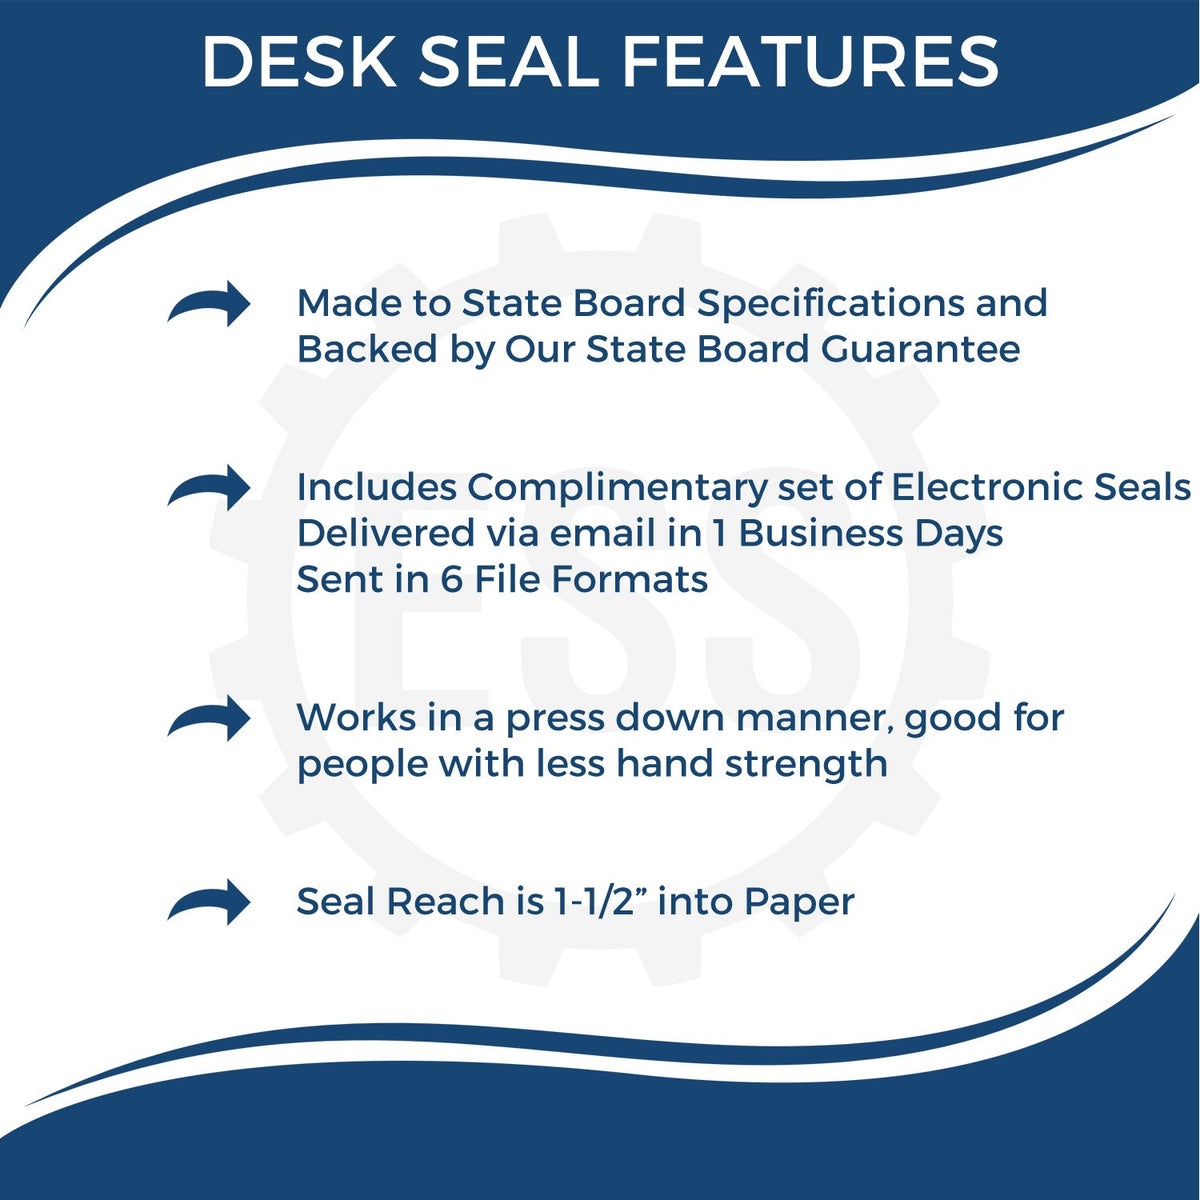 A picture of an infographic highlighting the selling points for the Oklahoma Engineer Desk Seal